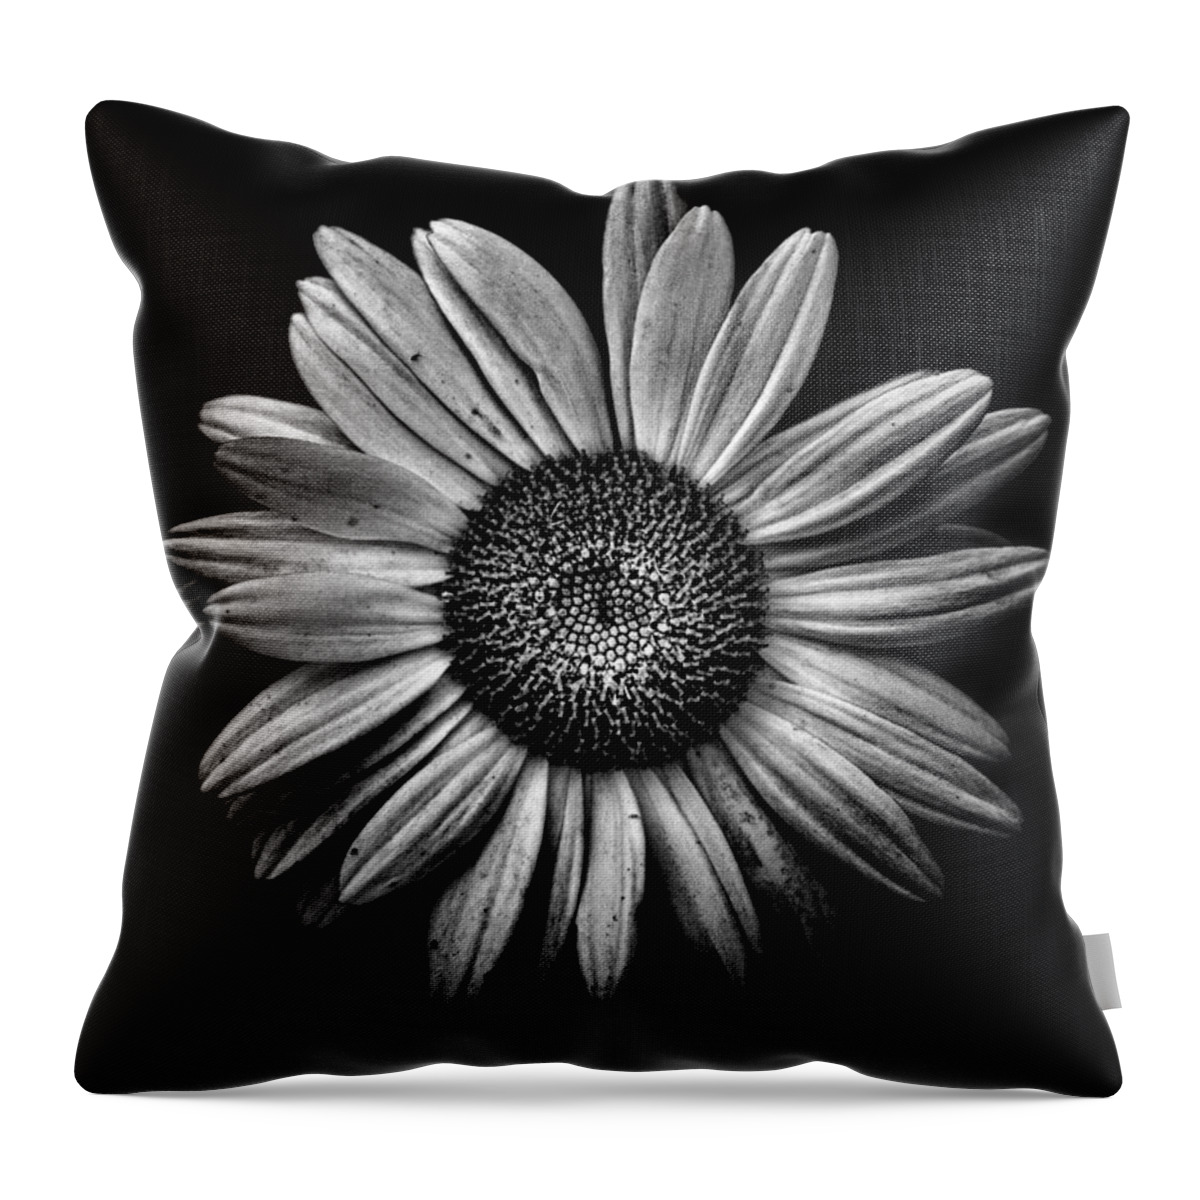 Abstract Throw Pillow featuring the photograph Backyard Flowers In Black And White 13 by Brian Carson